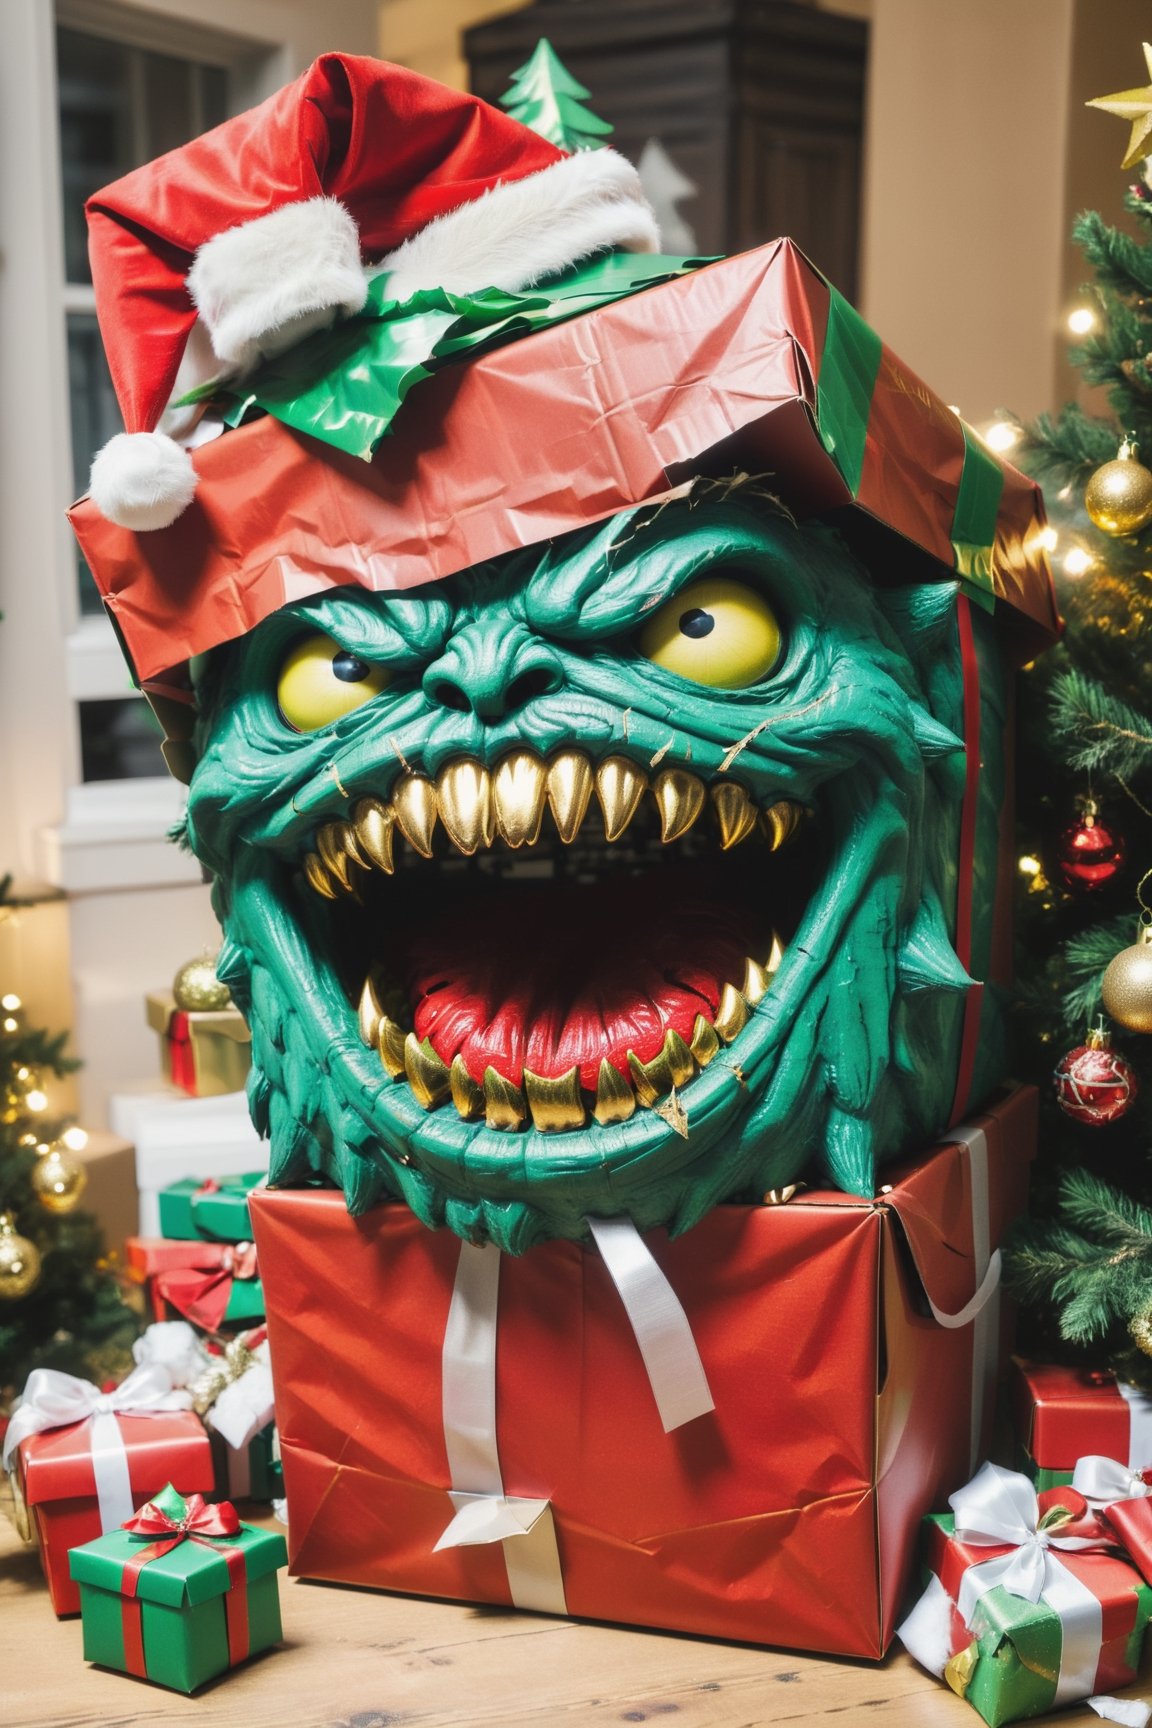  Christmas present box mimic , red cardboard box, green and gold bow, large teeth, closing large mouth, horror, dark Christmas atmosphere,christmas tree and decorations,monster